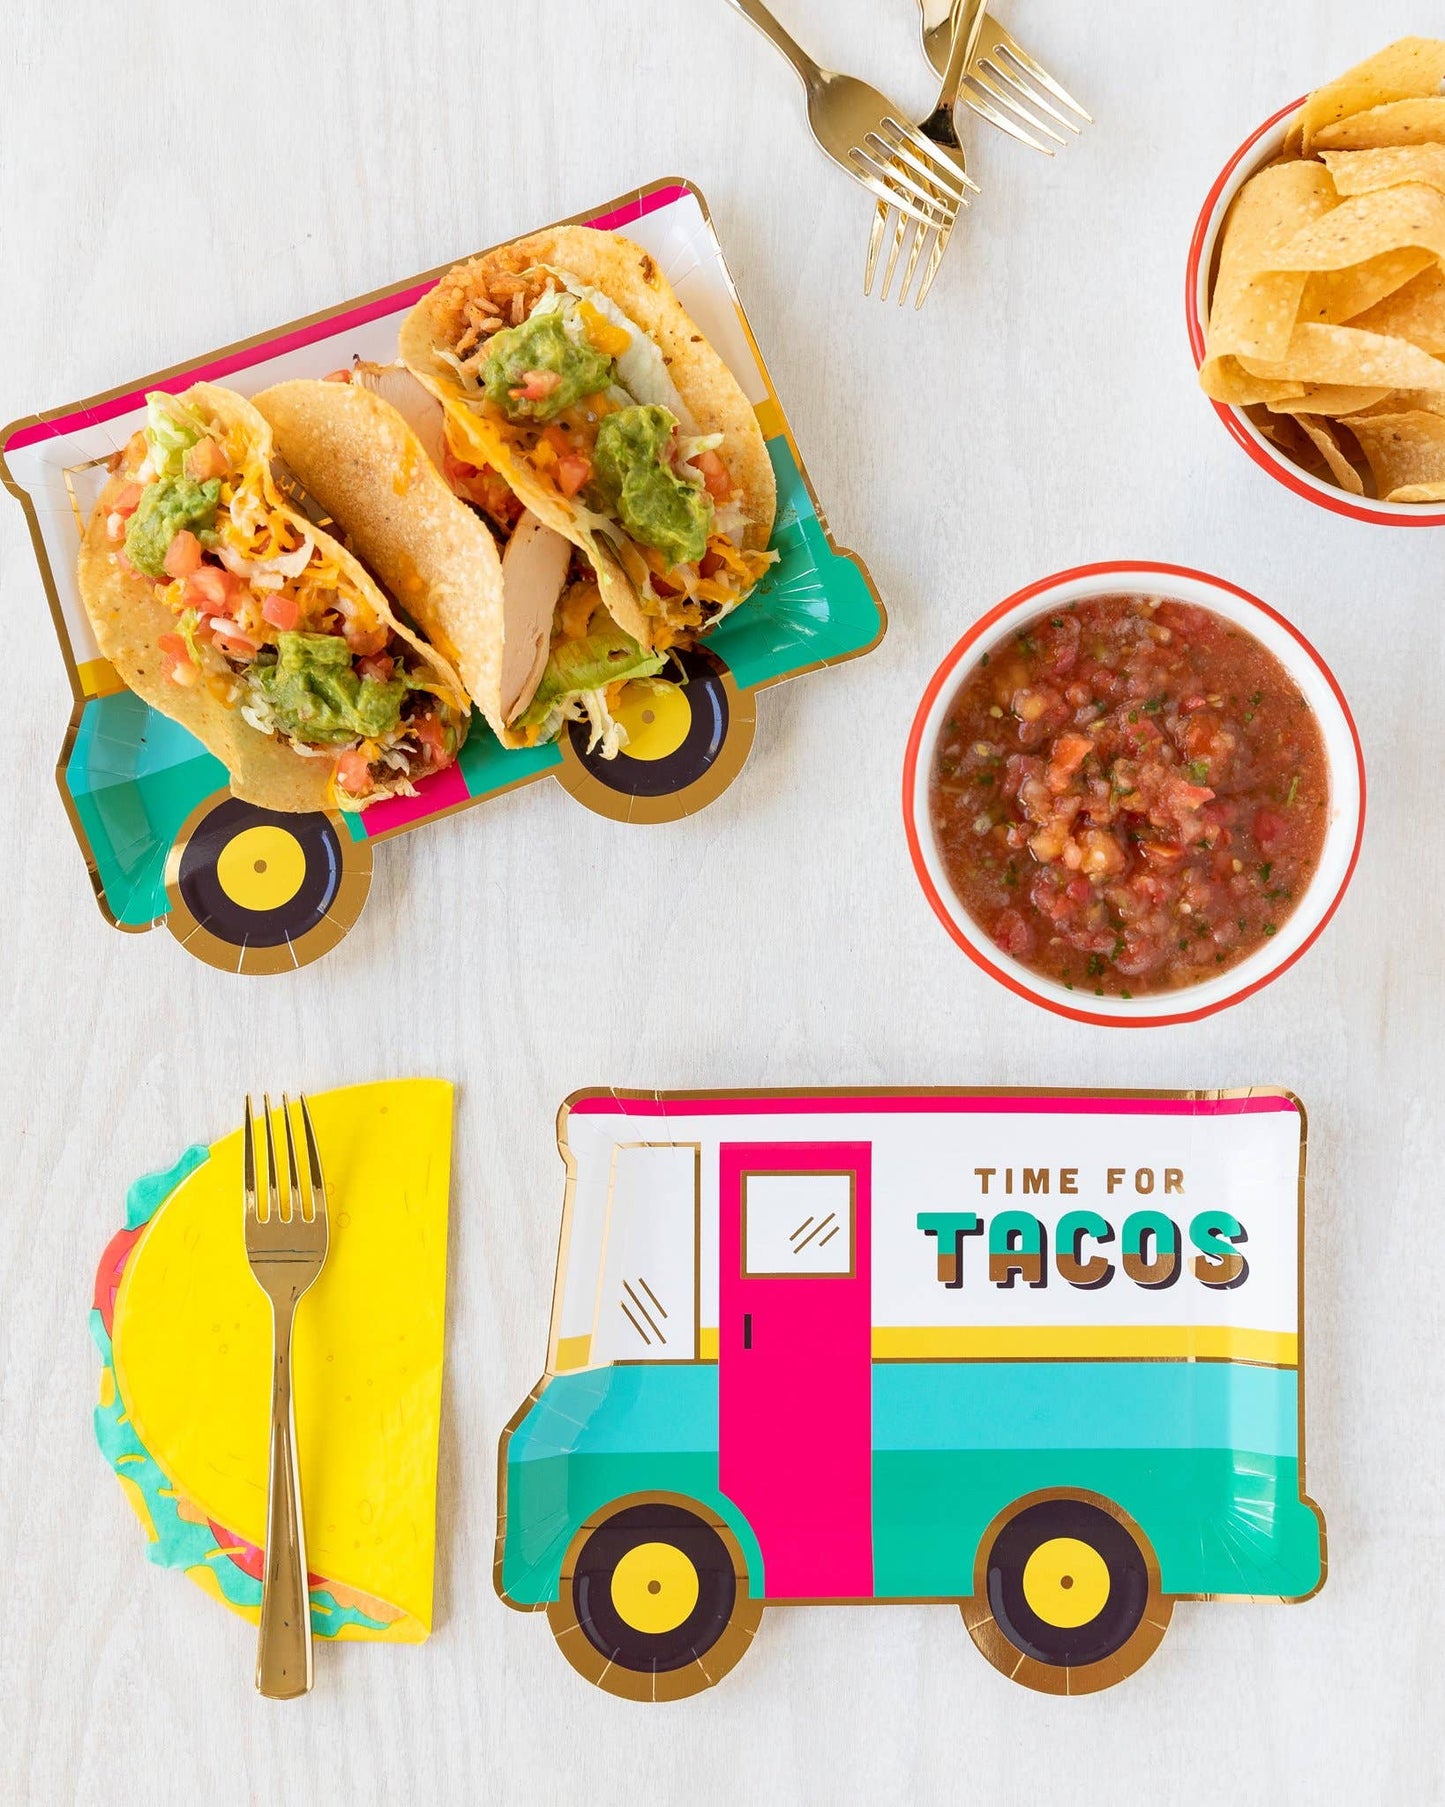 Get ready to taco 'bout the cutest napkin ever! This fun taco napkin is a must-have for any fiesta or Taco Tuesday. It pairs perfectly with our taco truck plate and will definitely spice up your dining experience. Can you tell we're taco-lovers around here? This napkin is a fiesta essential, adding a pop of fun to your table setting. Don't miss out on the fiesta vibes this napkin brings! It's the perfect way to show off your love for all things taco. Grab one (or a few) now and let the fiesta begin!